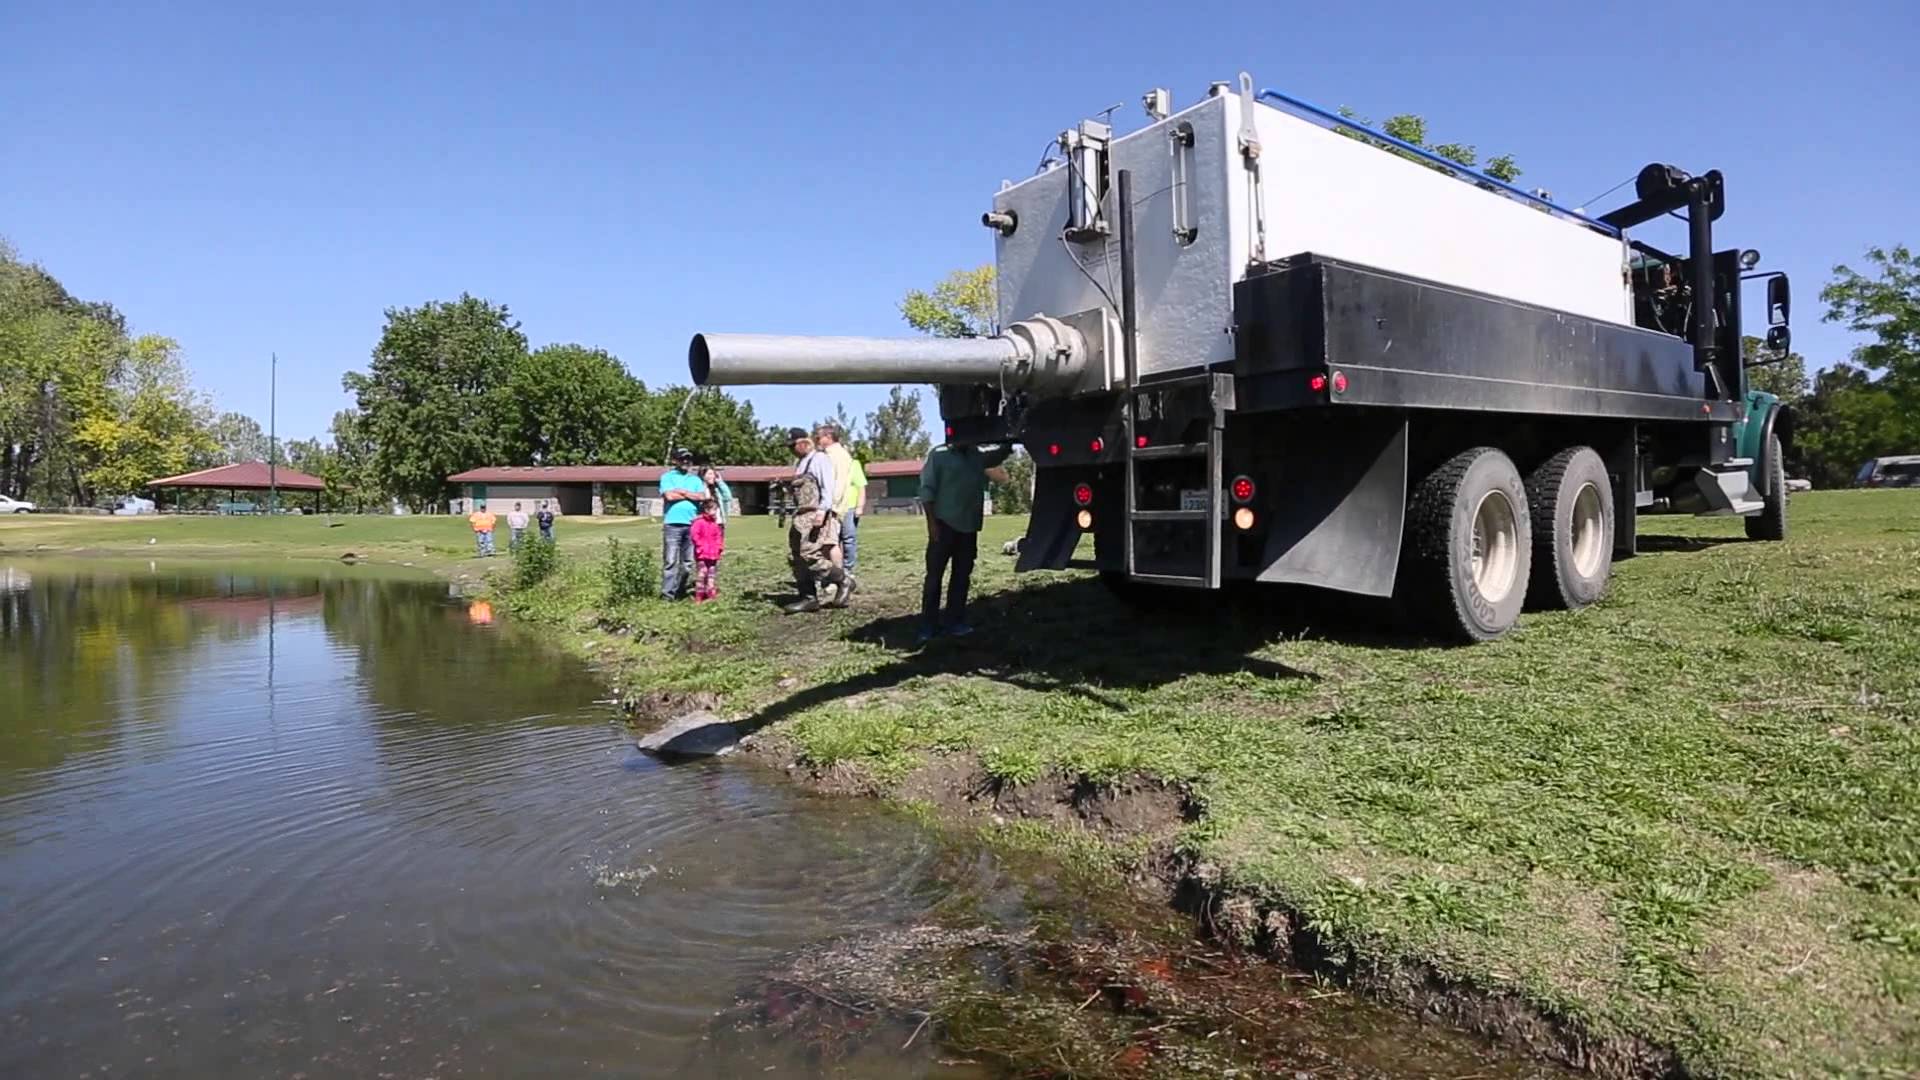 Columbia Park pond gets stocked with rainbow trout